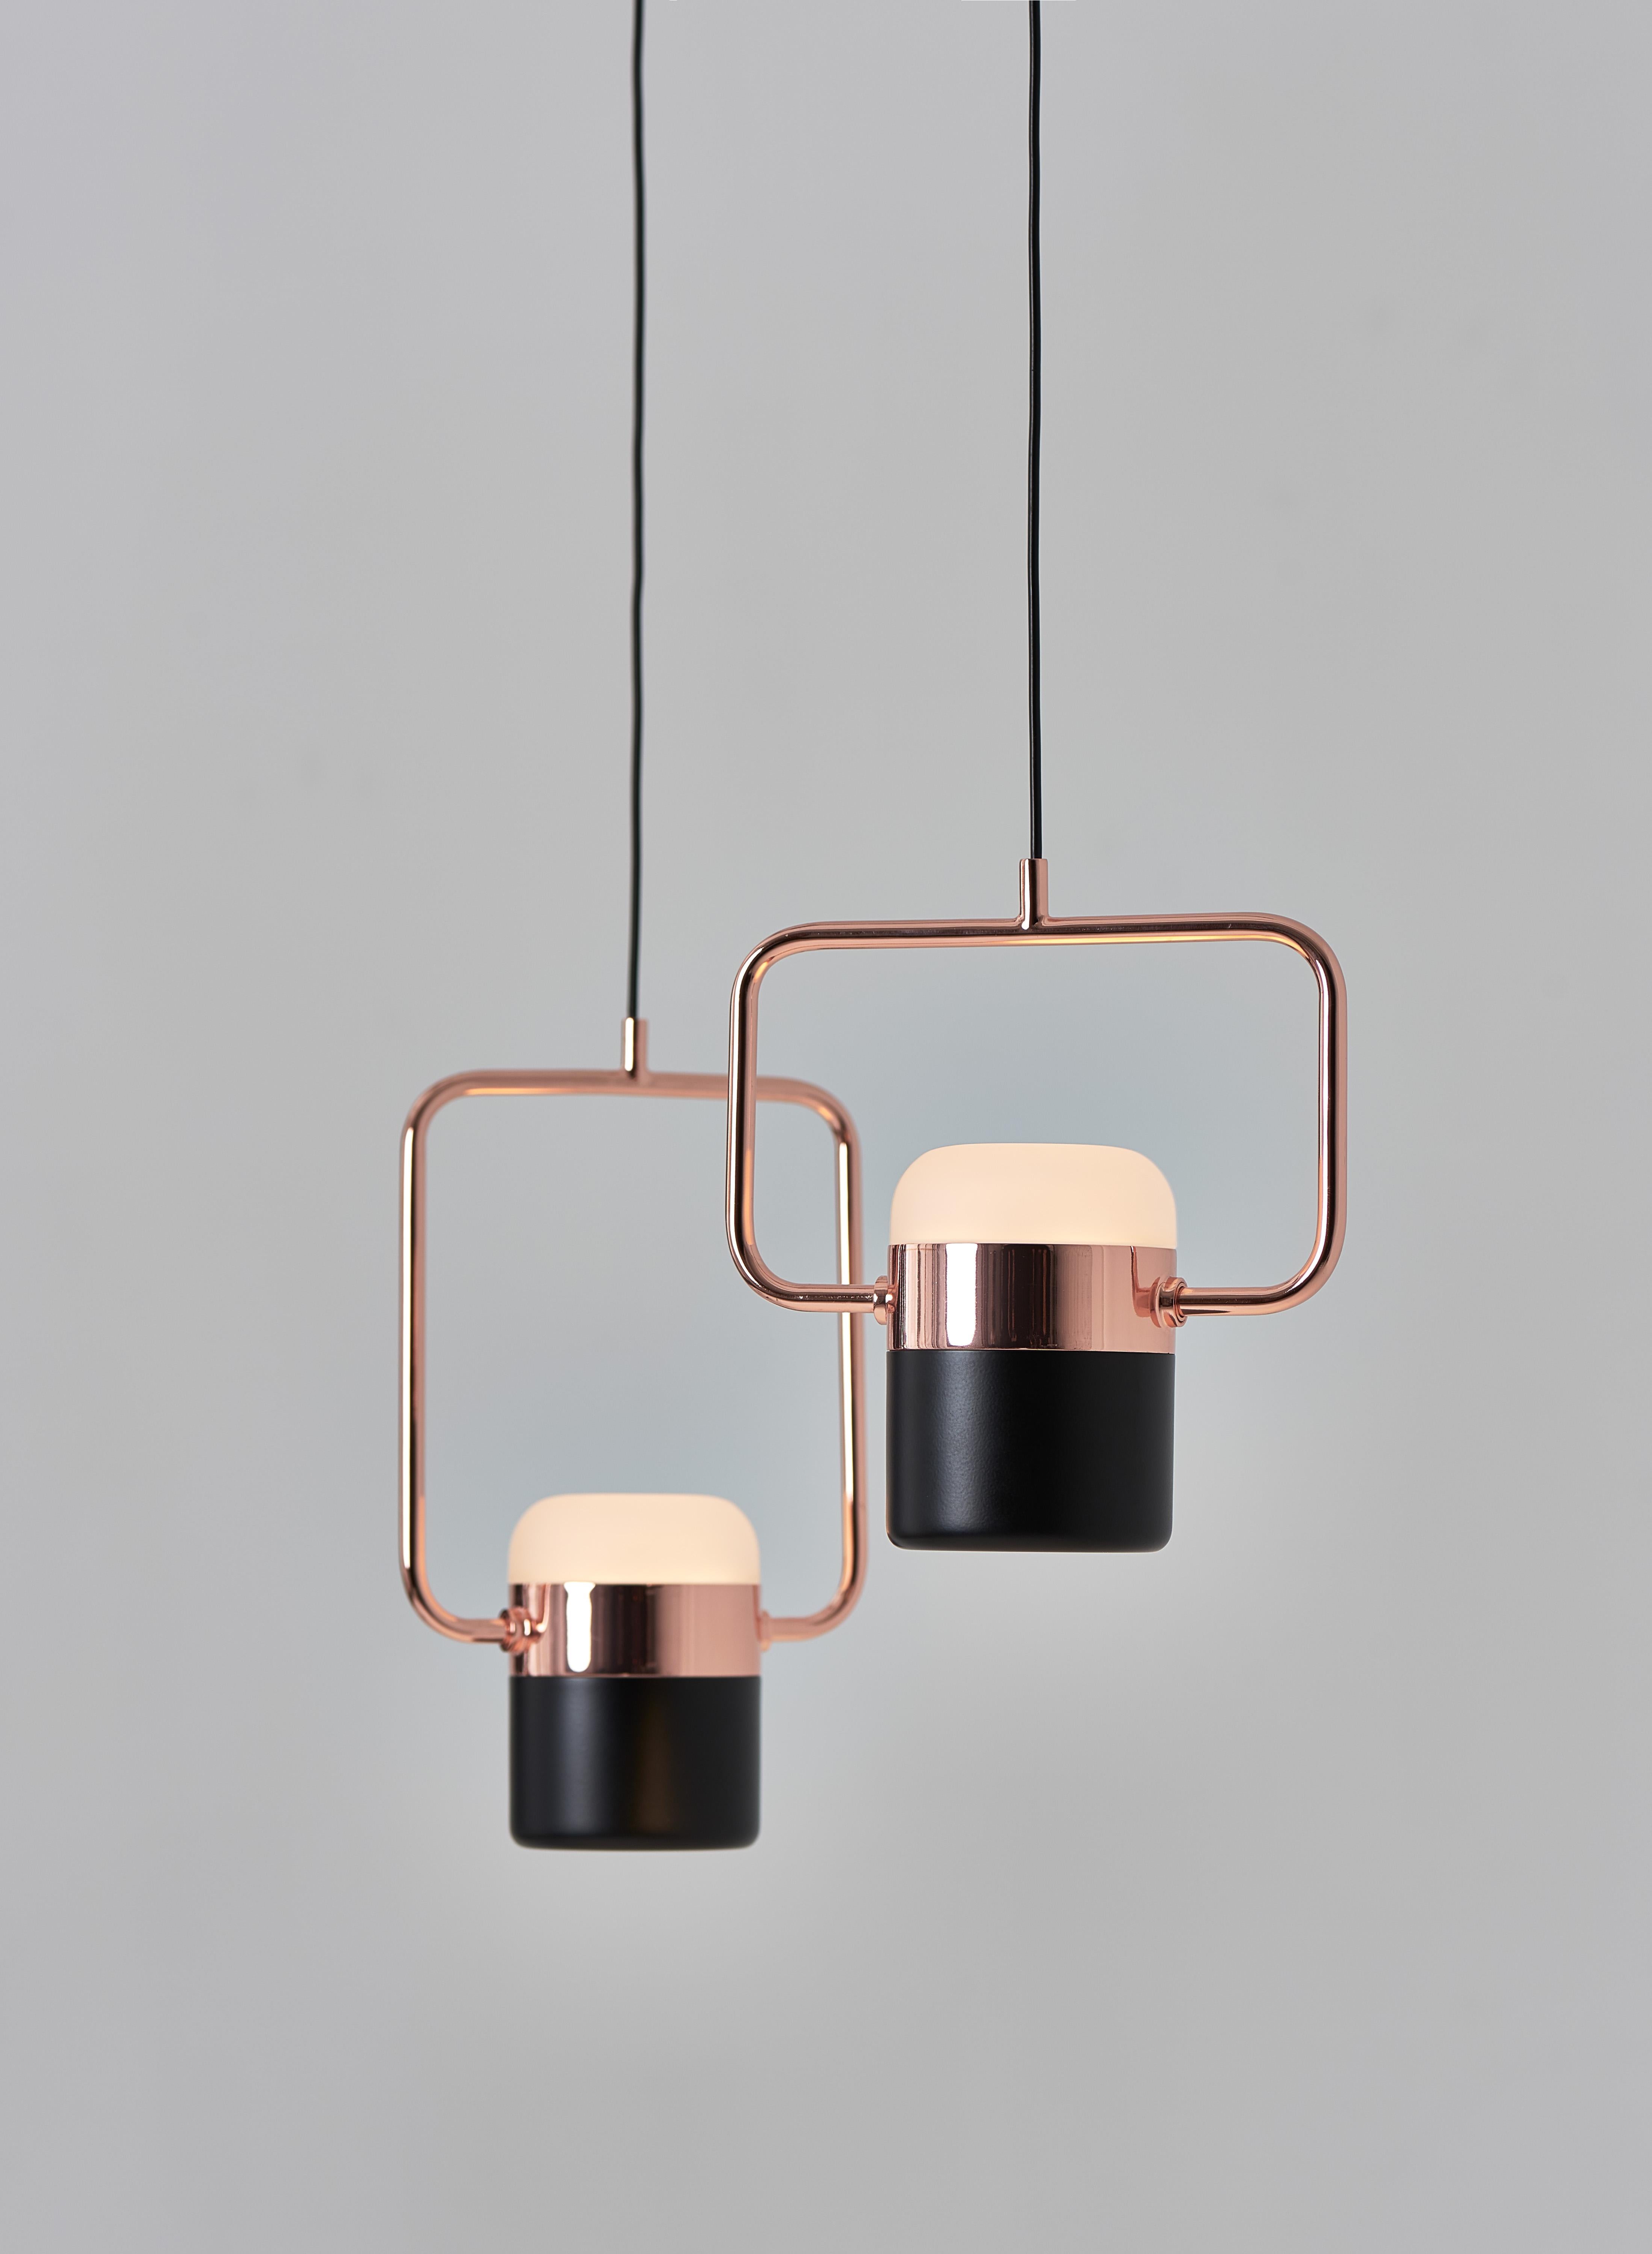 LING Pendant H is a harmonious mingle of minimalism and nostalgia design which is inspired by patterned metal-fence used to be built around balconies and windows in early Taiwan. The copper/ brass glow elegantly connects glass and metal shade.